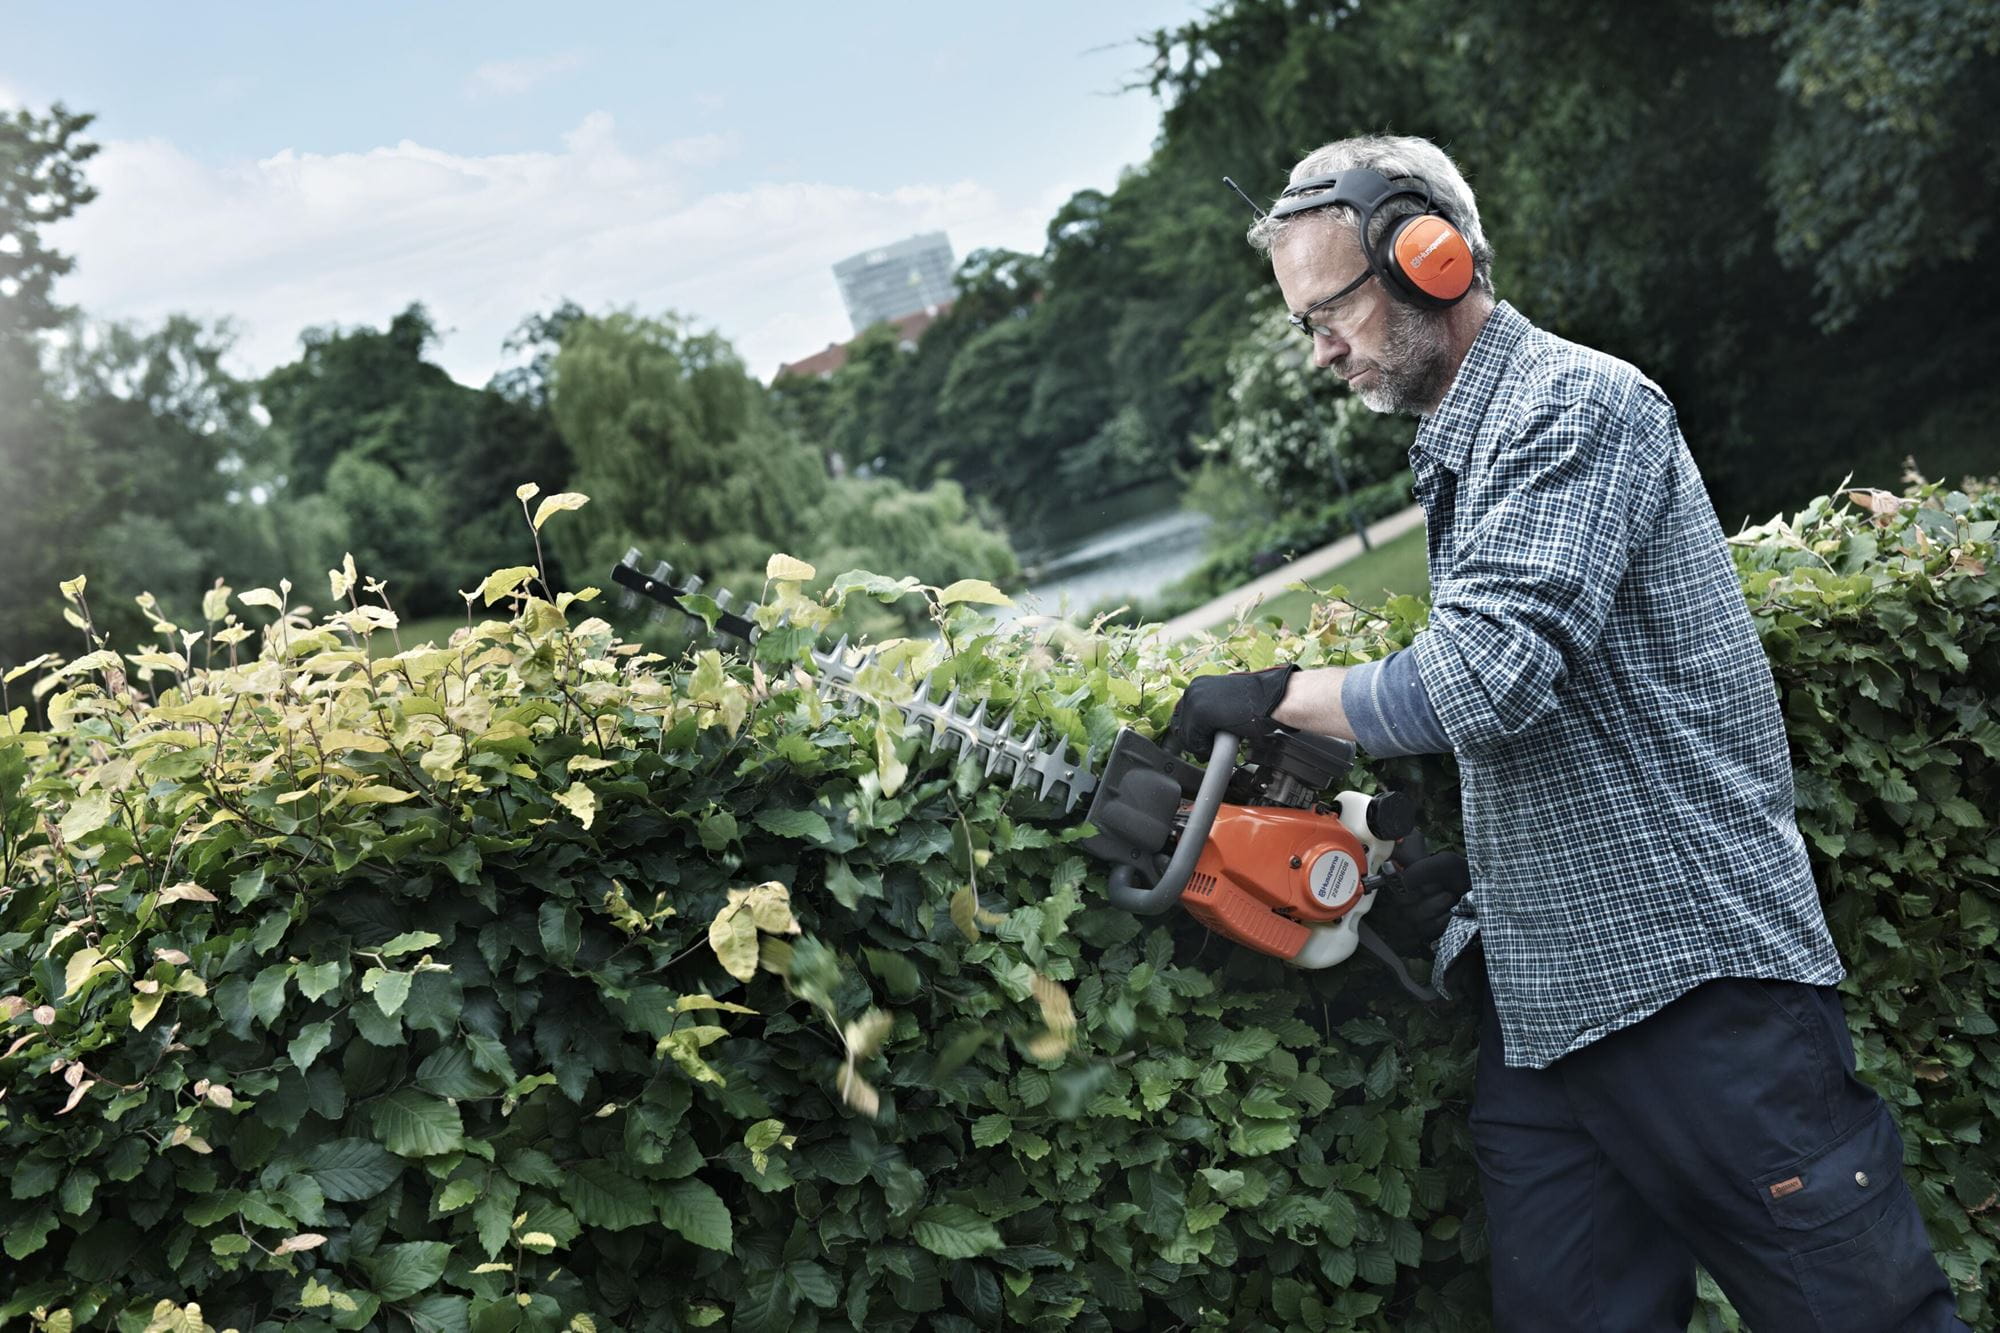 Double sided hedge trimmers